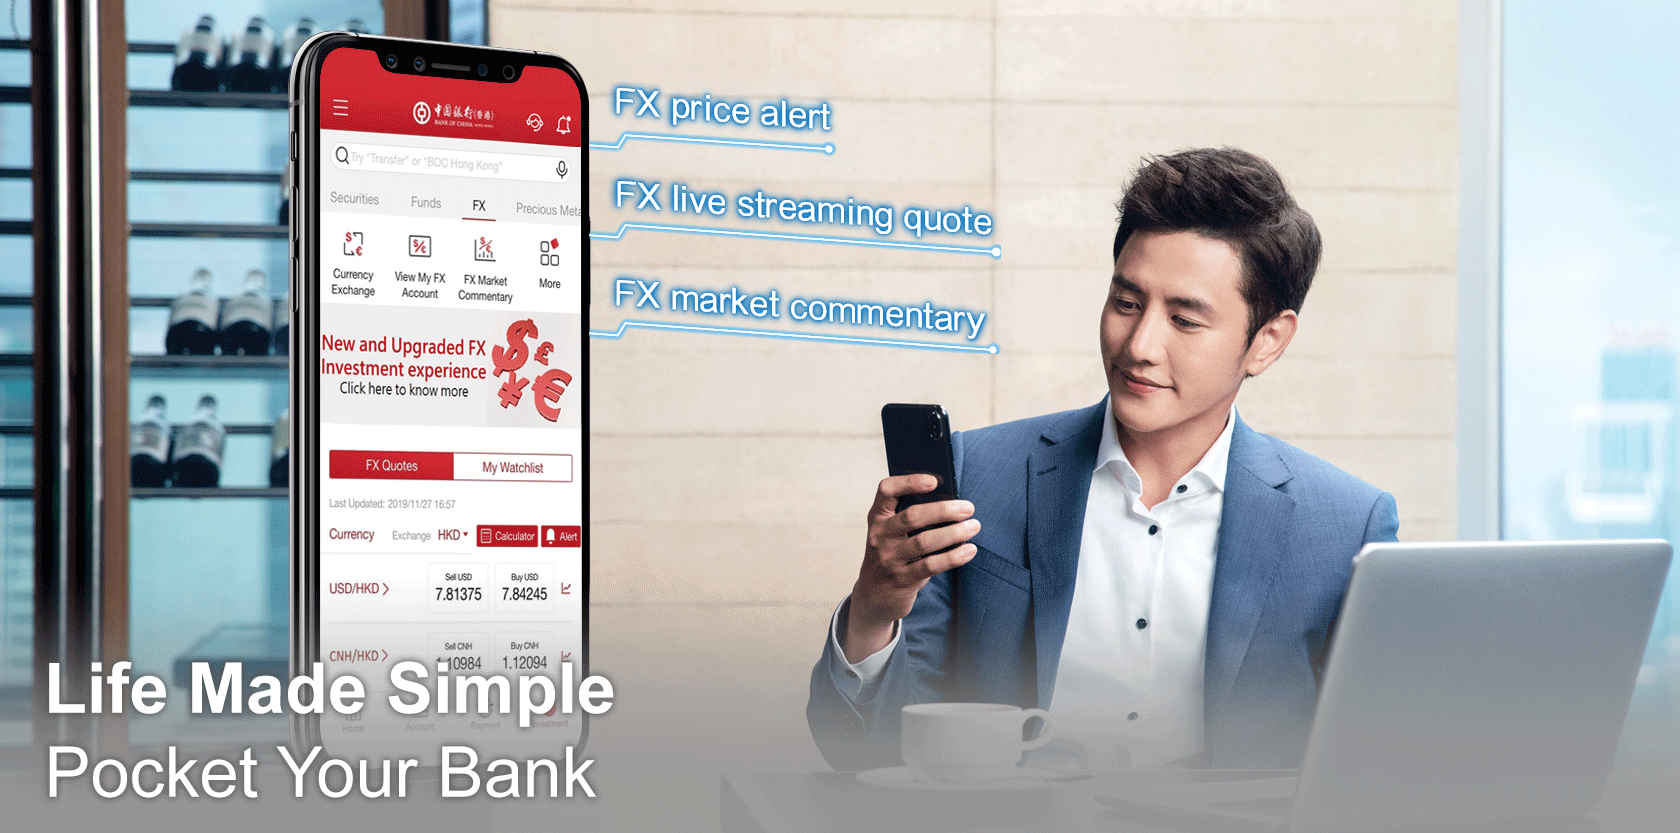 Life Made Simple Pocket Your Bank
Stay ahead of the latest market trends and trade at your fingertips